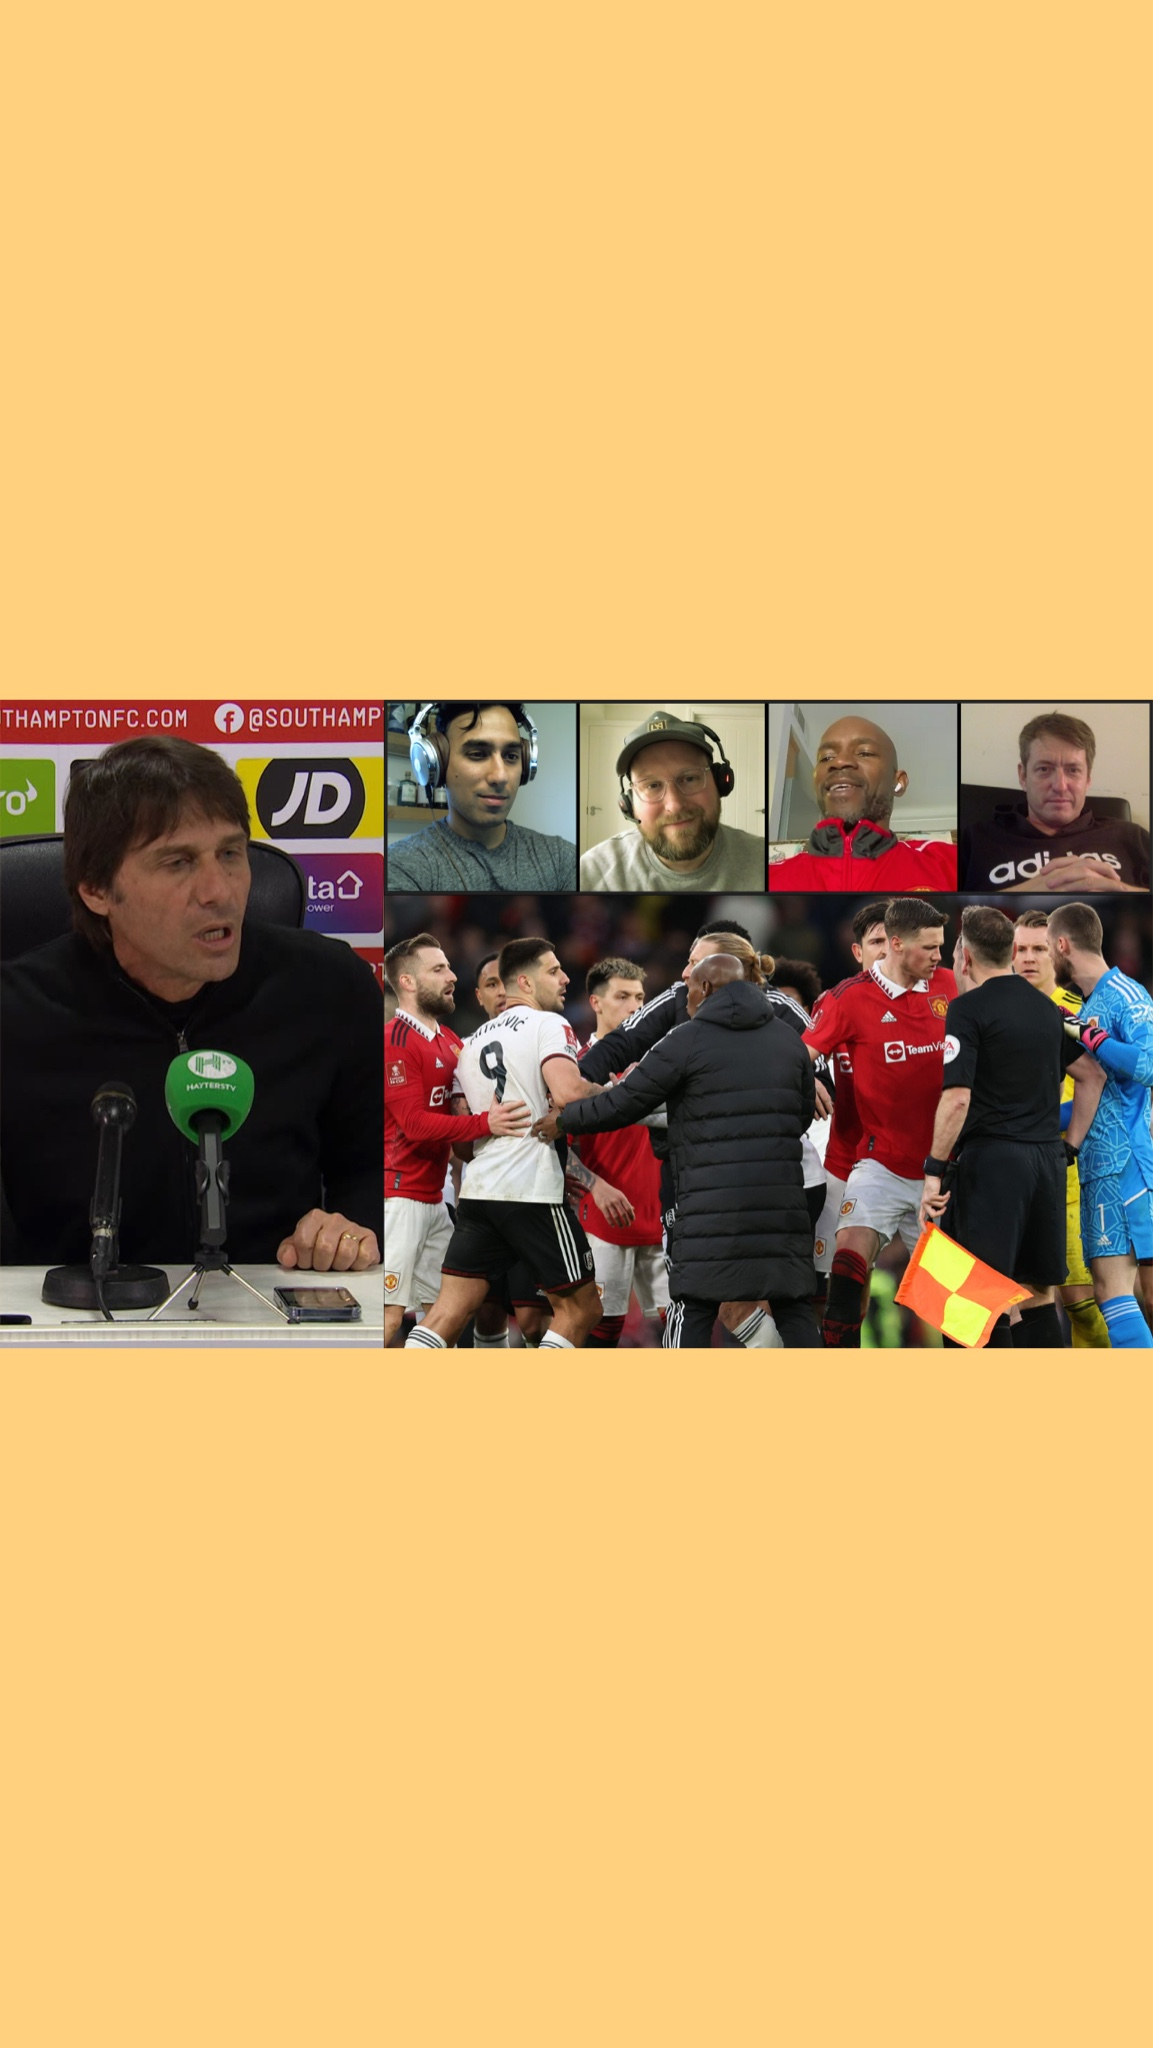 Red Cards & Chaos In Utd vs Fulham, Conte’s Press Conference, Spurs vs Southampton & Chelsea Game!!